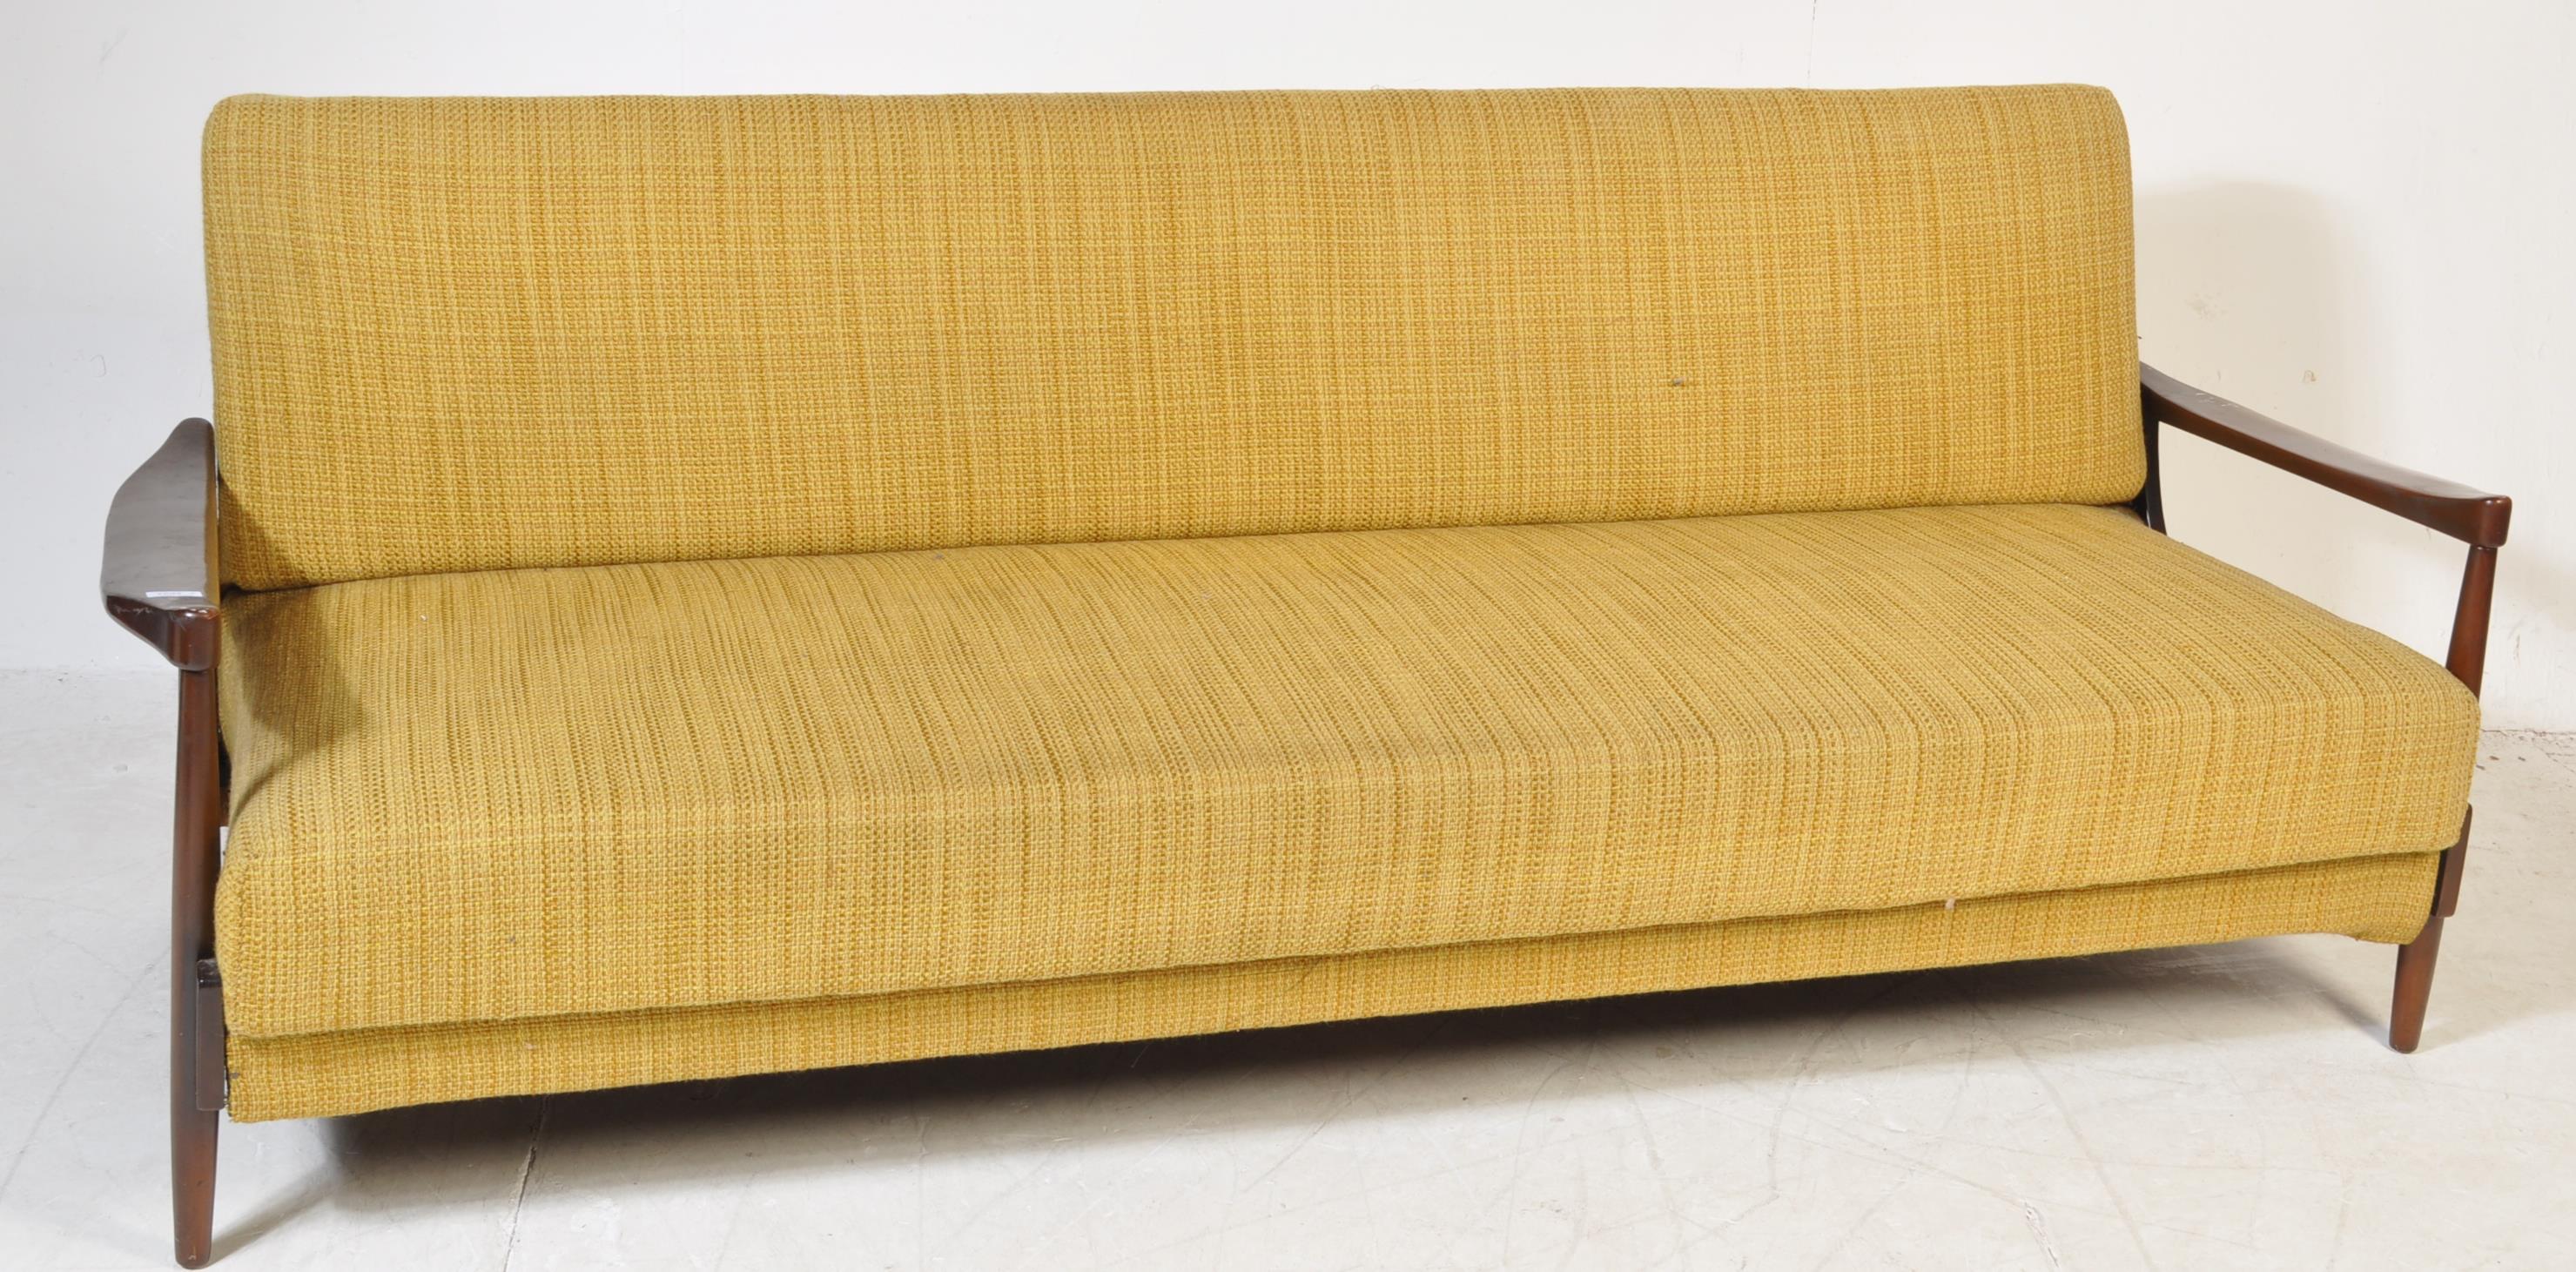 MID-CENTURY SCANDART MANNER SOFA BED / DAY BED - Image 2 of 7